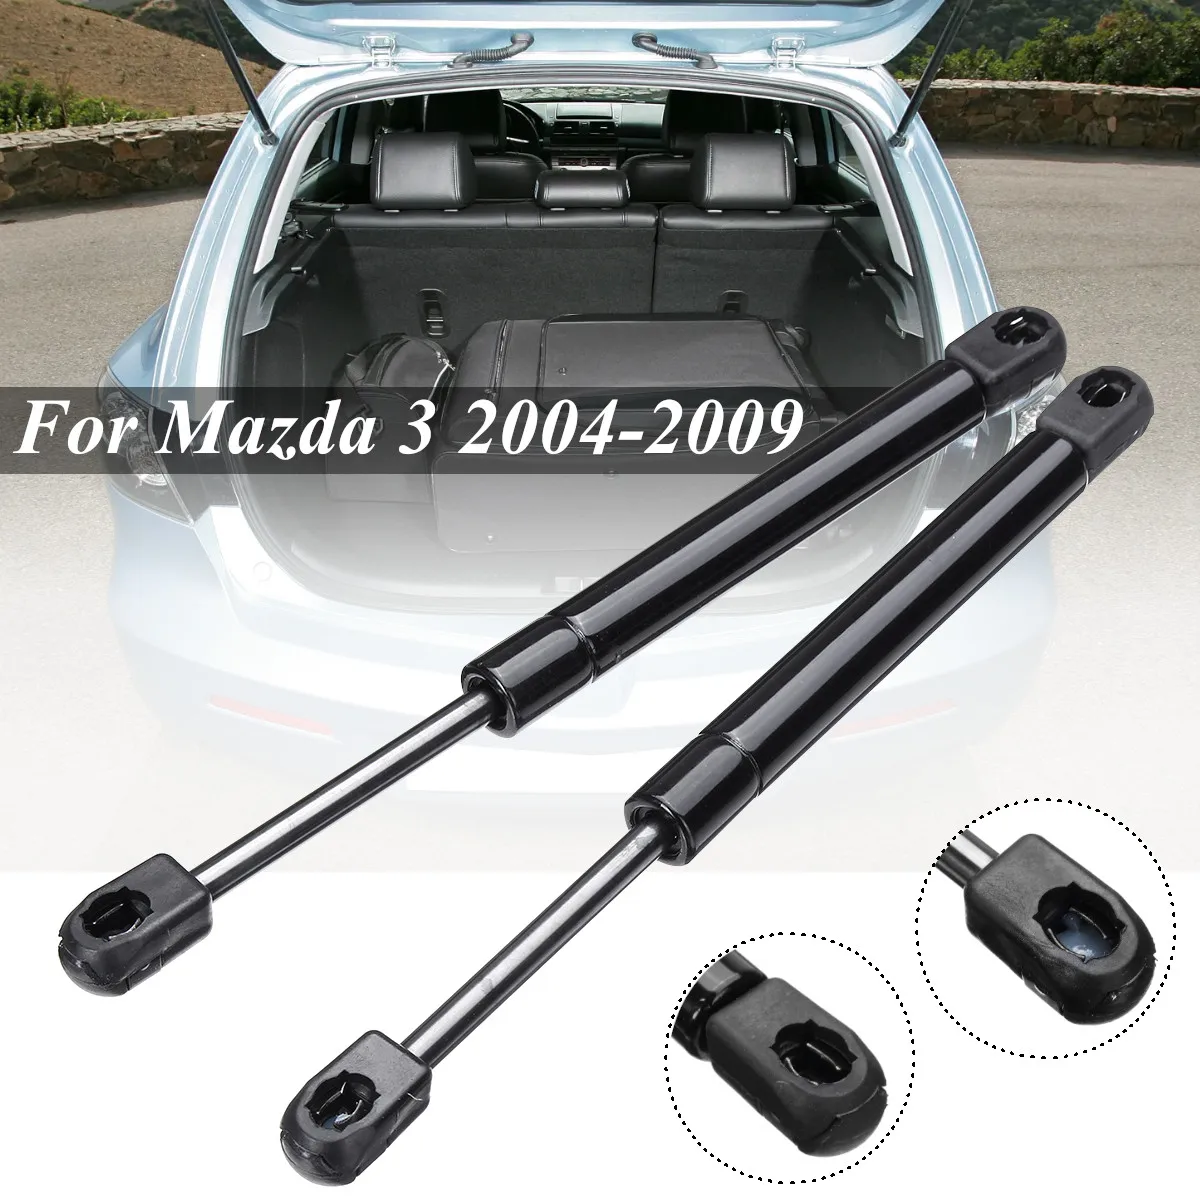 

RMAUTO 2Pcs Car Tailgate Trunk Boot Gas Spring Strut Bars Support Lift BN8W56930 For Mazda 3 2004-2009 BN8V56930 BN8W56930A